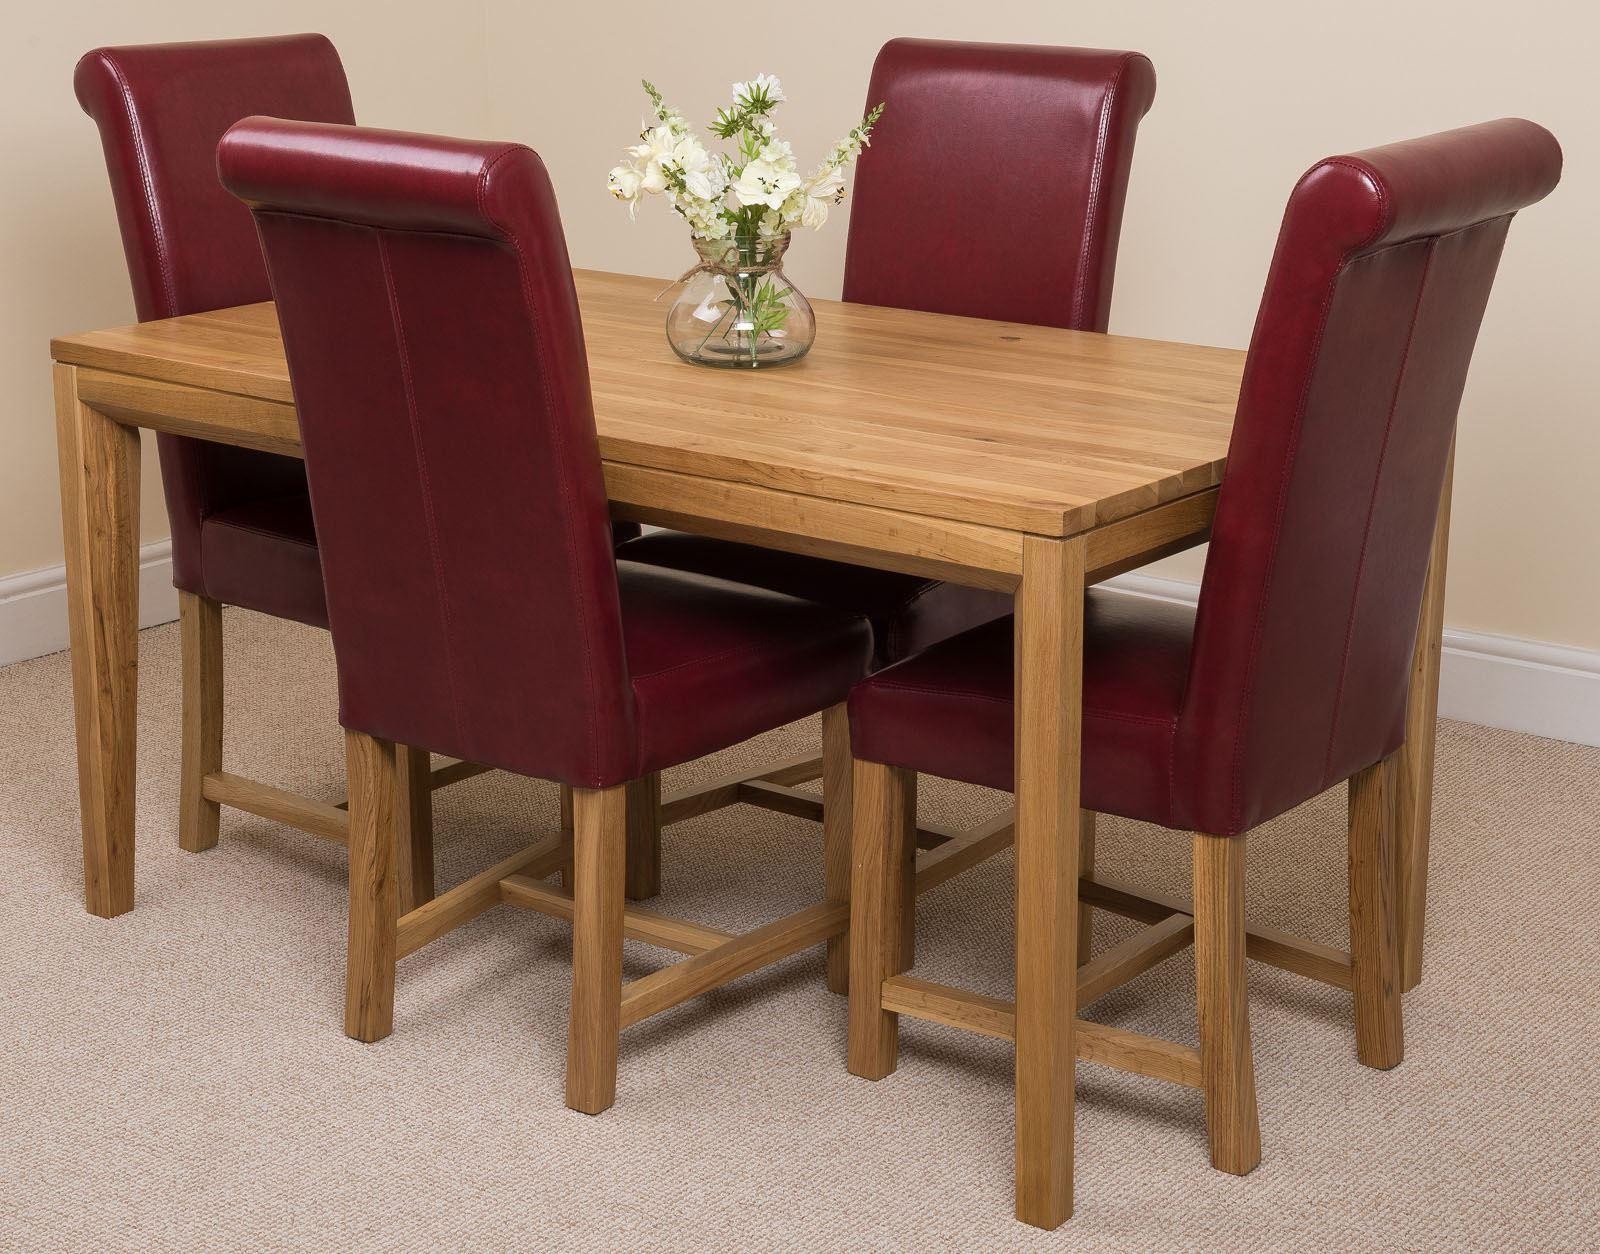 Bevel solid oak 150cm dining table & 4 red washington leather chairs